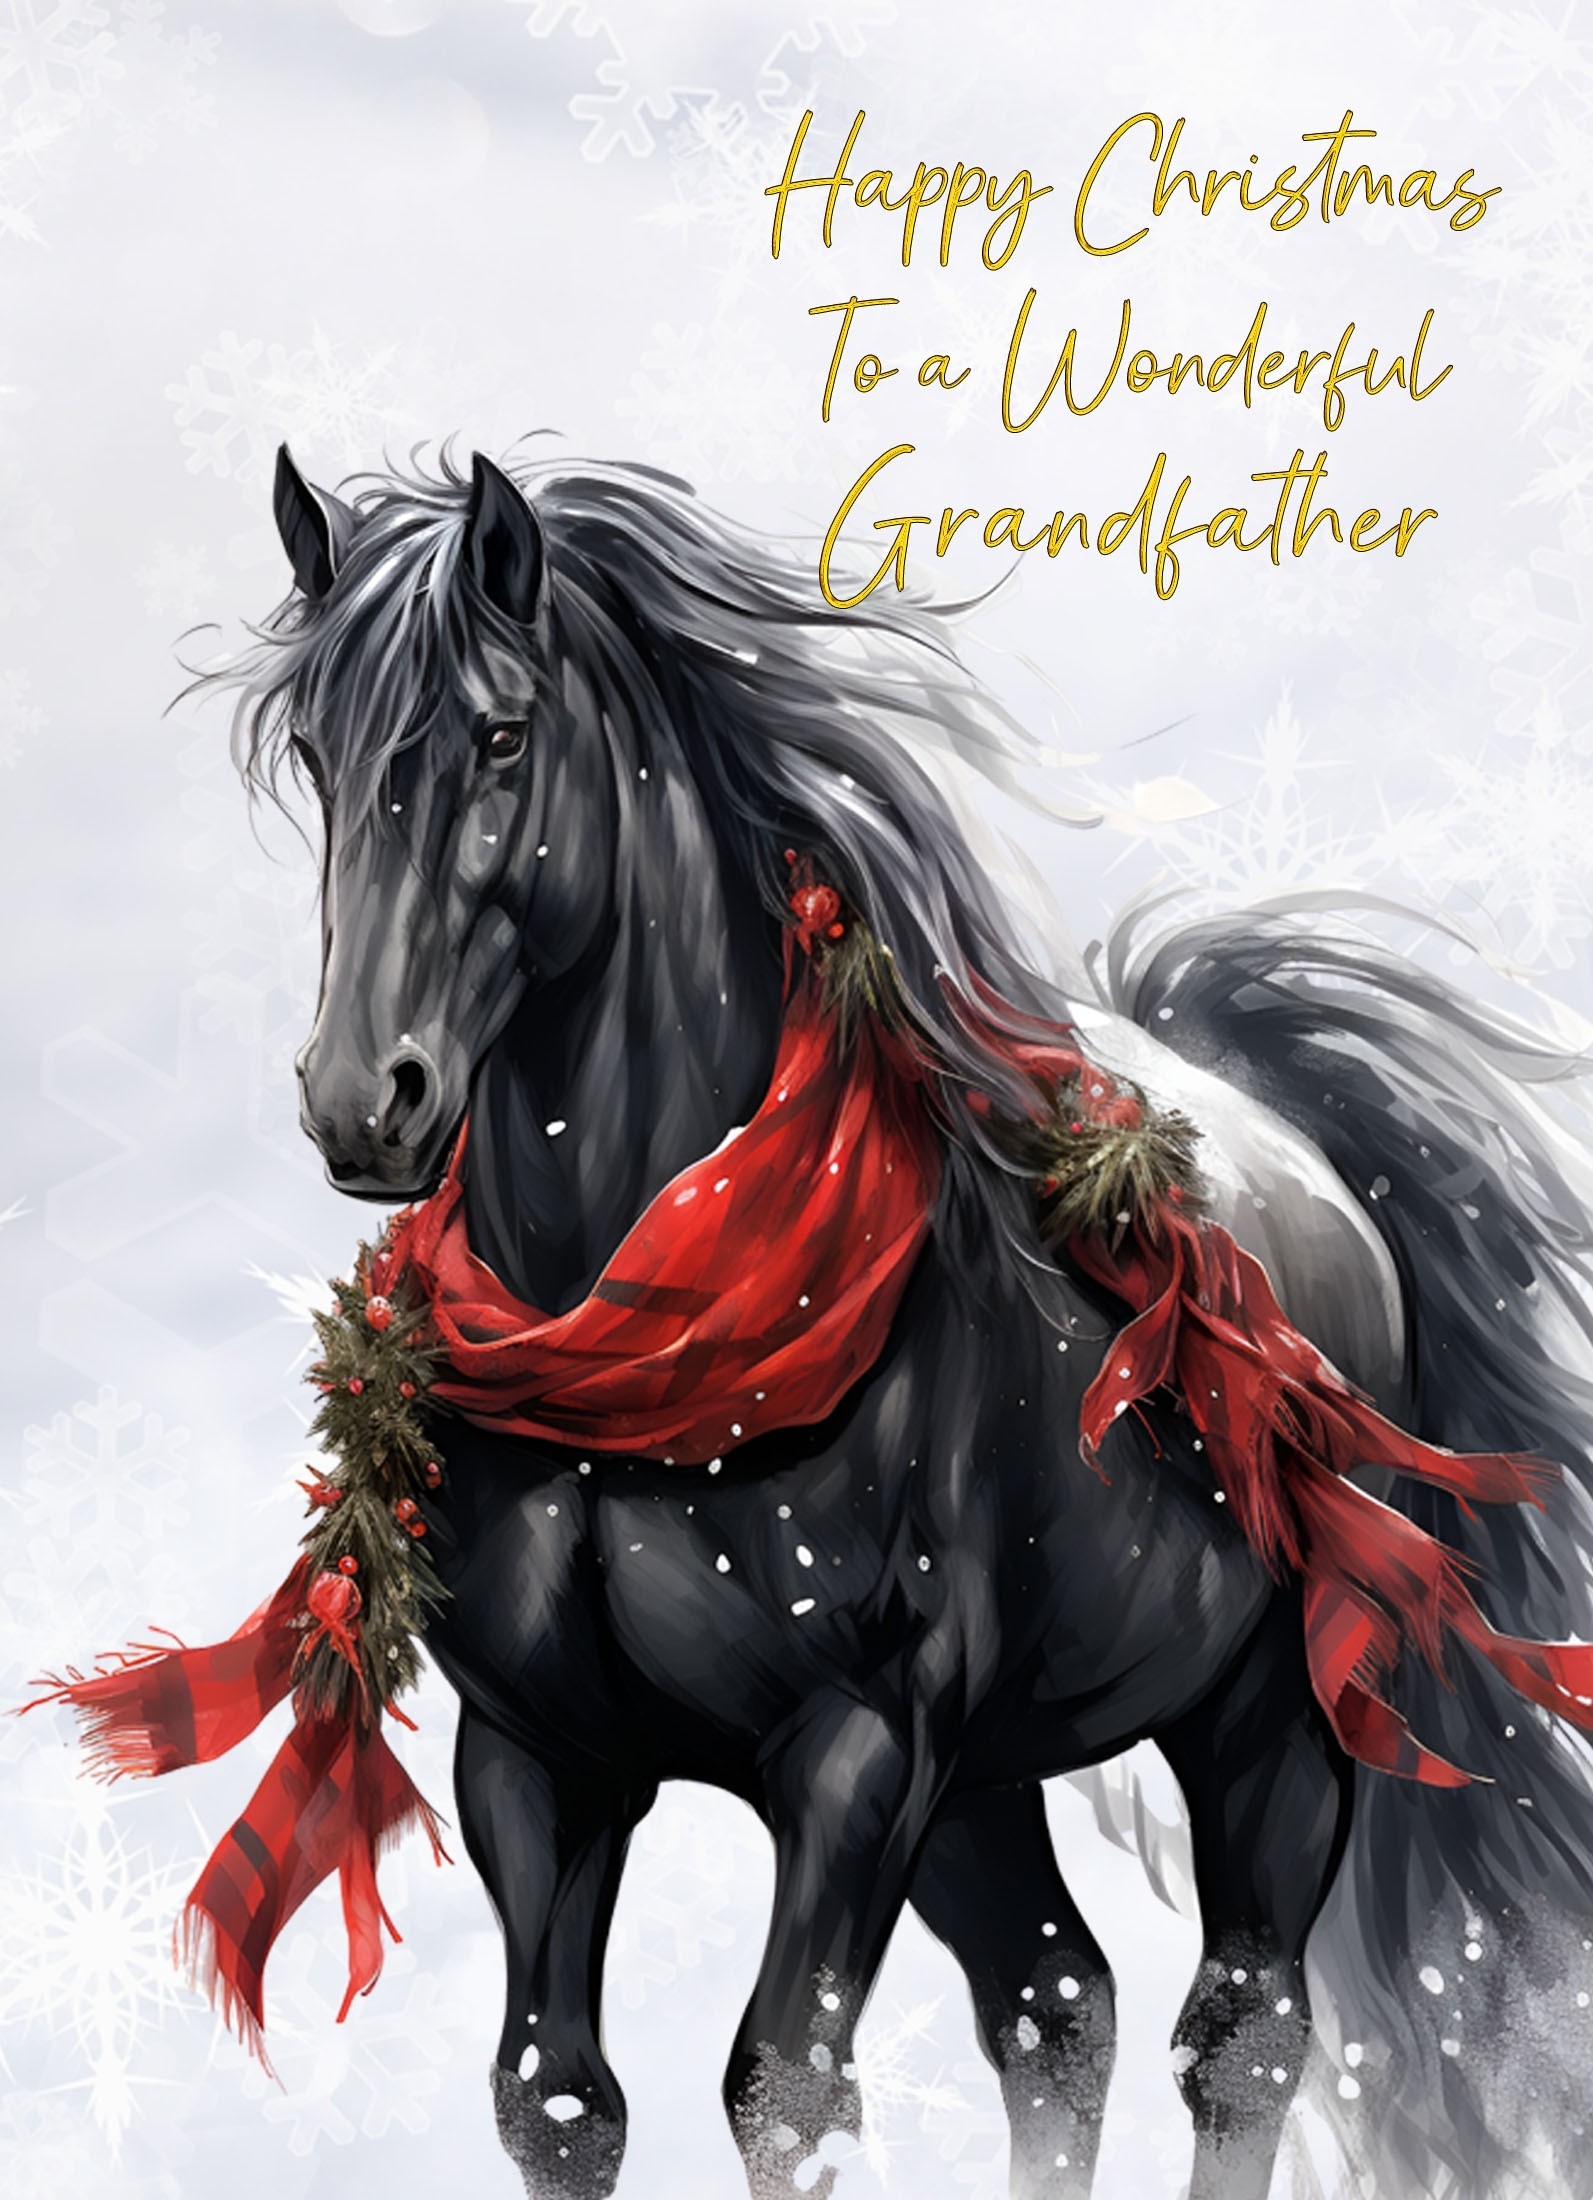 Christmas Card For Grandfather (Horse Art Black)